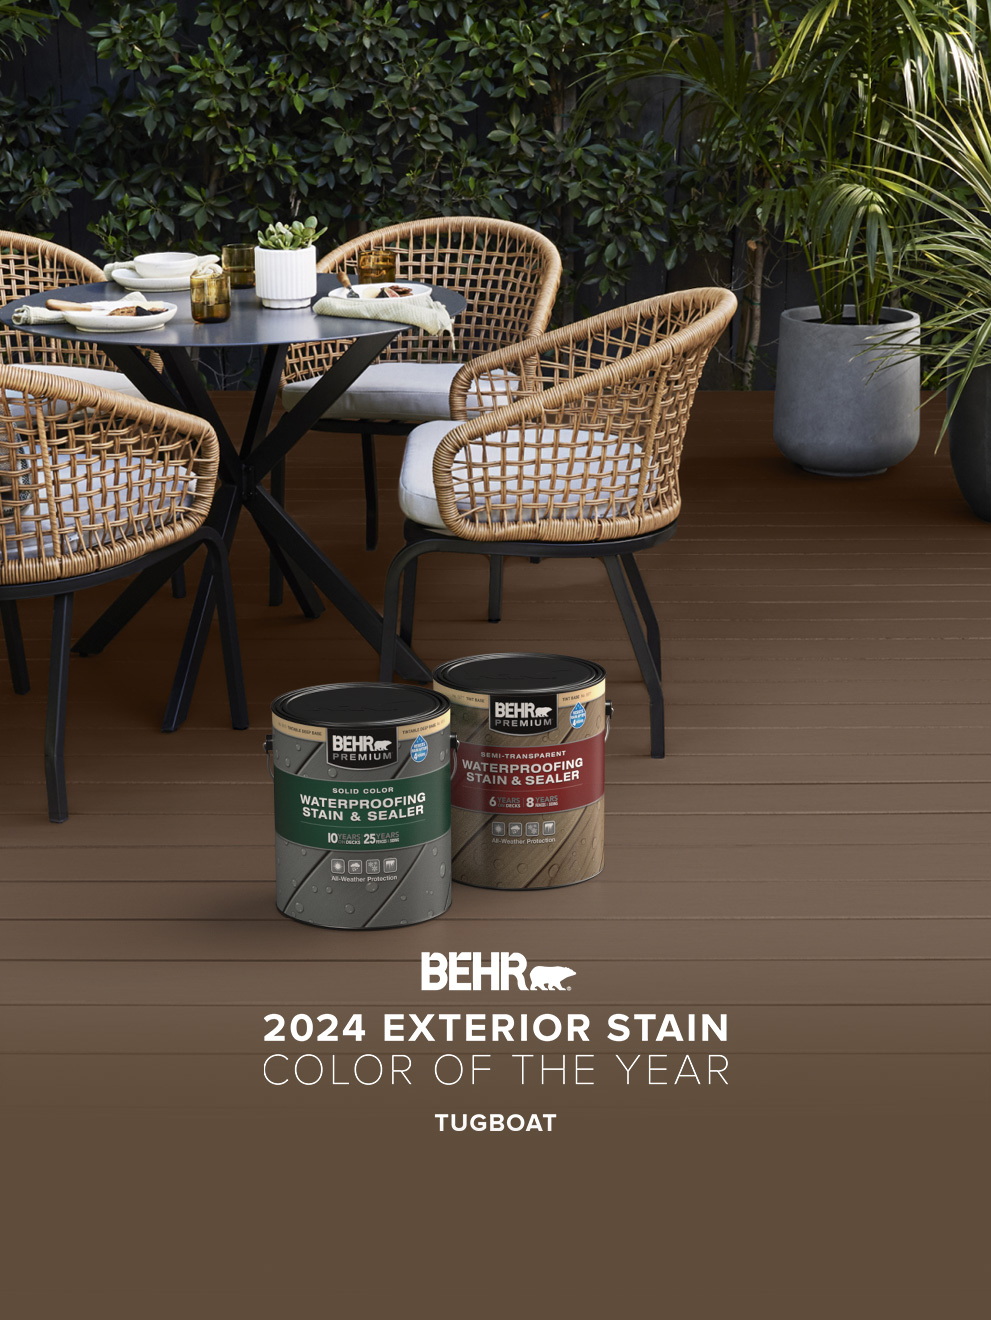 Tugboat 2024 Exterior Stain Color of the Year